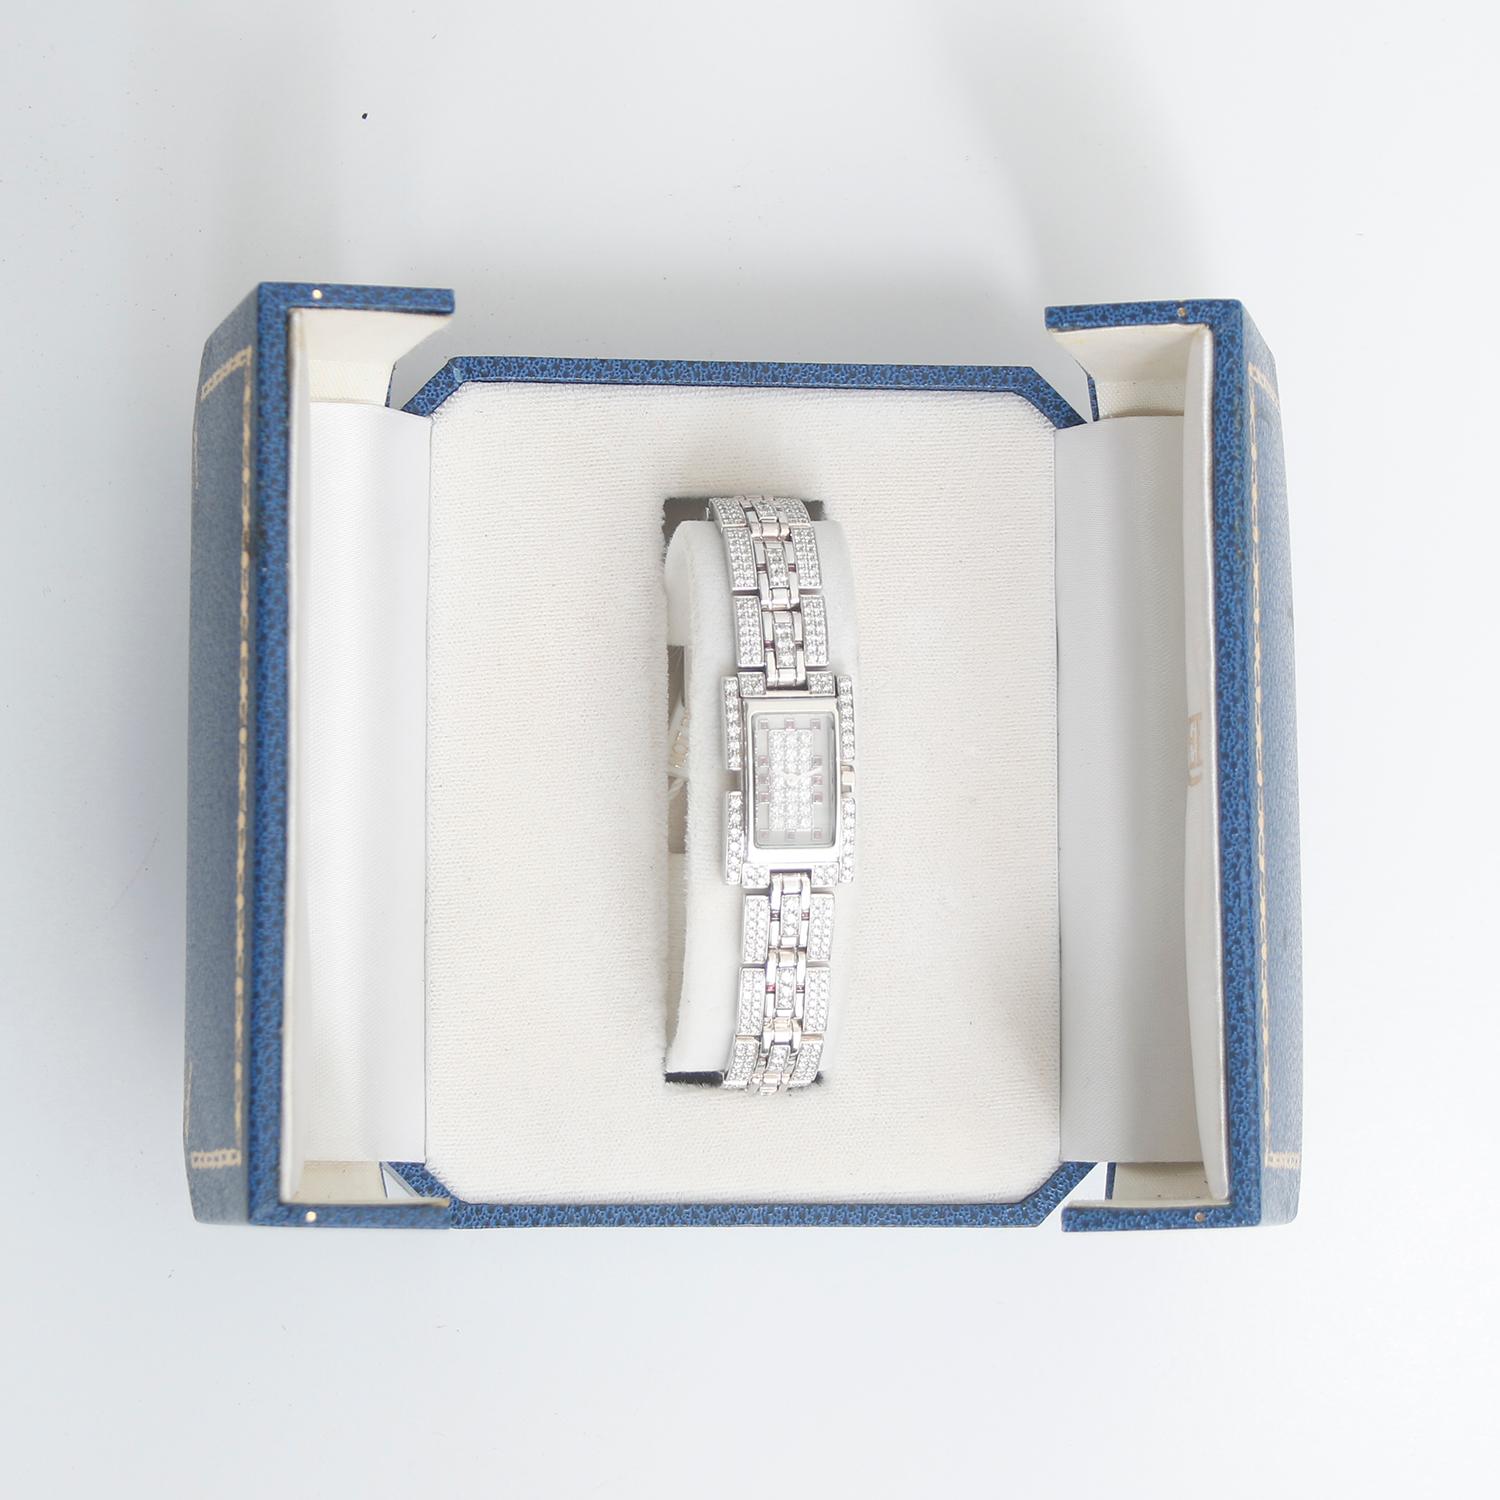 Fred of Paris 18K White Gold Pave Diamond Ladies Watch - Quartz. 18K White Gold with pave diamonds ( 28 x 18 mm ). Ivory dial with pave diamonds and rubies as hour markers. 18K White gold with diamonds and rubies; will fit up to a 6 1/2 inch wrist.